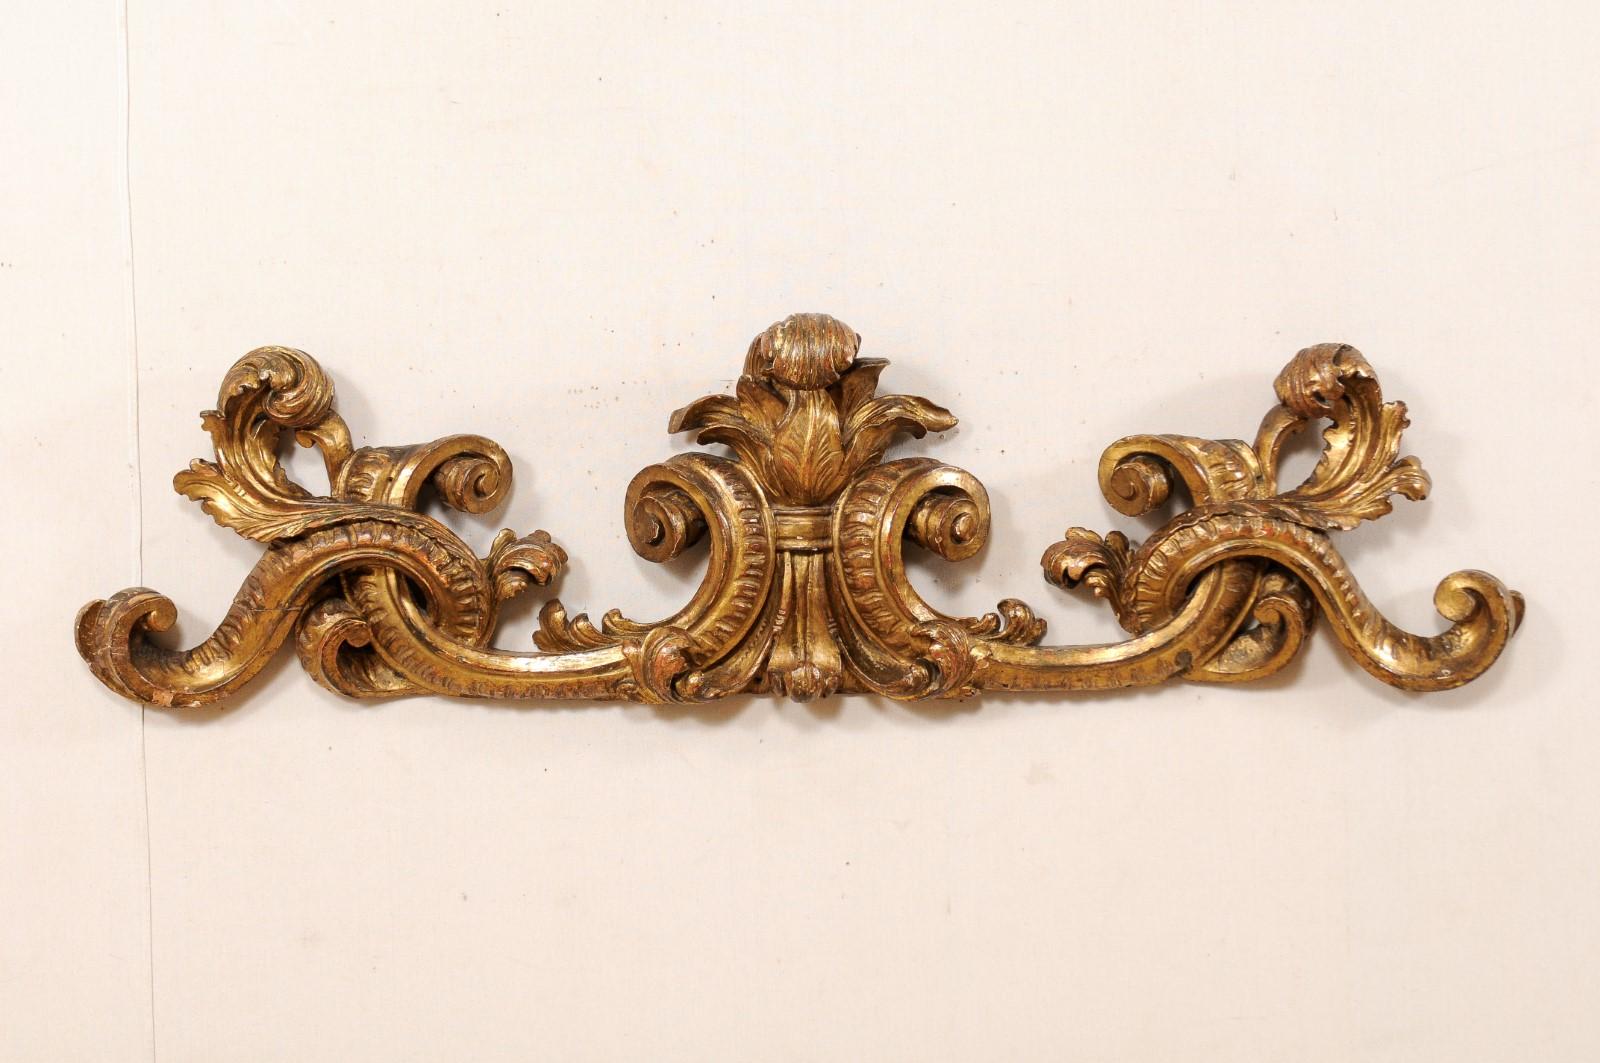 An Italian 18th century gilt and carved wood wall fragment. This antique Italian wall decoration has a drawn out, more horizontally positioned shape, which is heavily carved in a scroll and acanthus leave motif. The top of the plaque features three